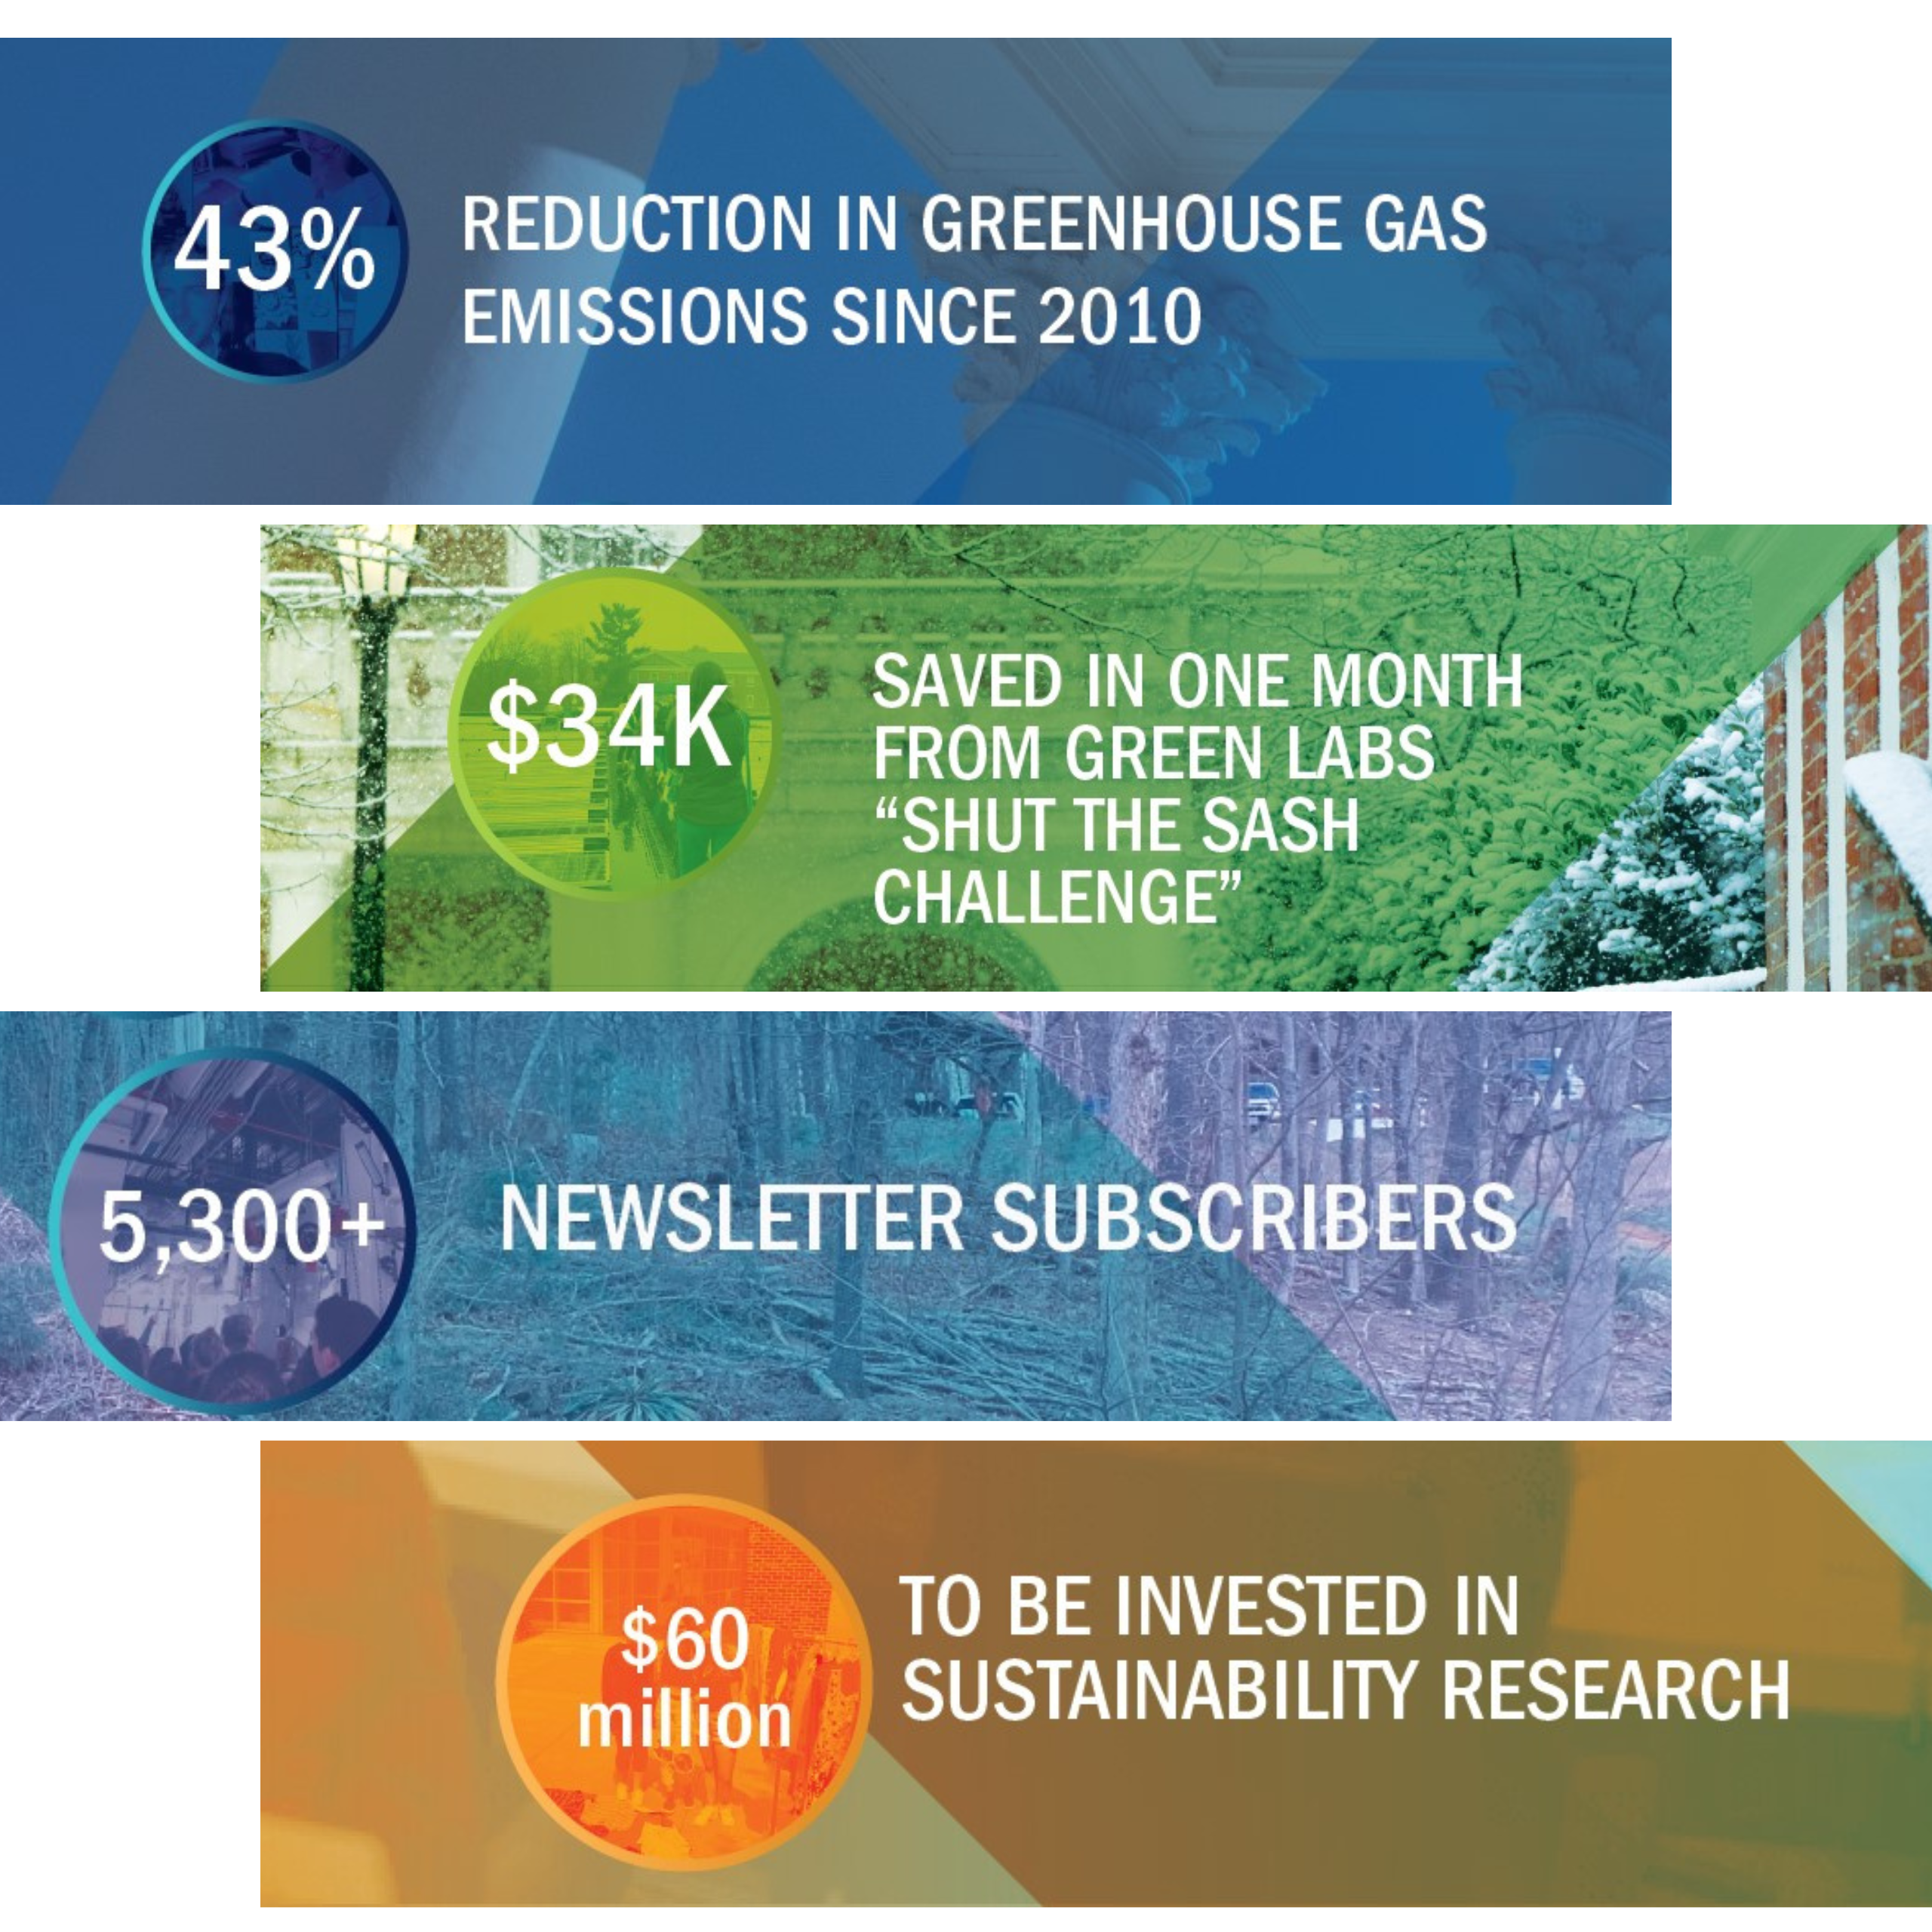 Sustainability and annual report